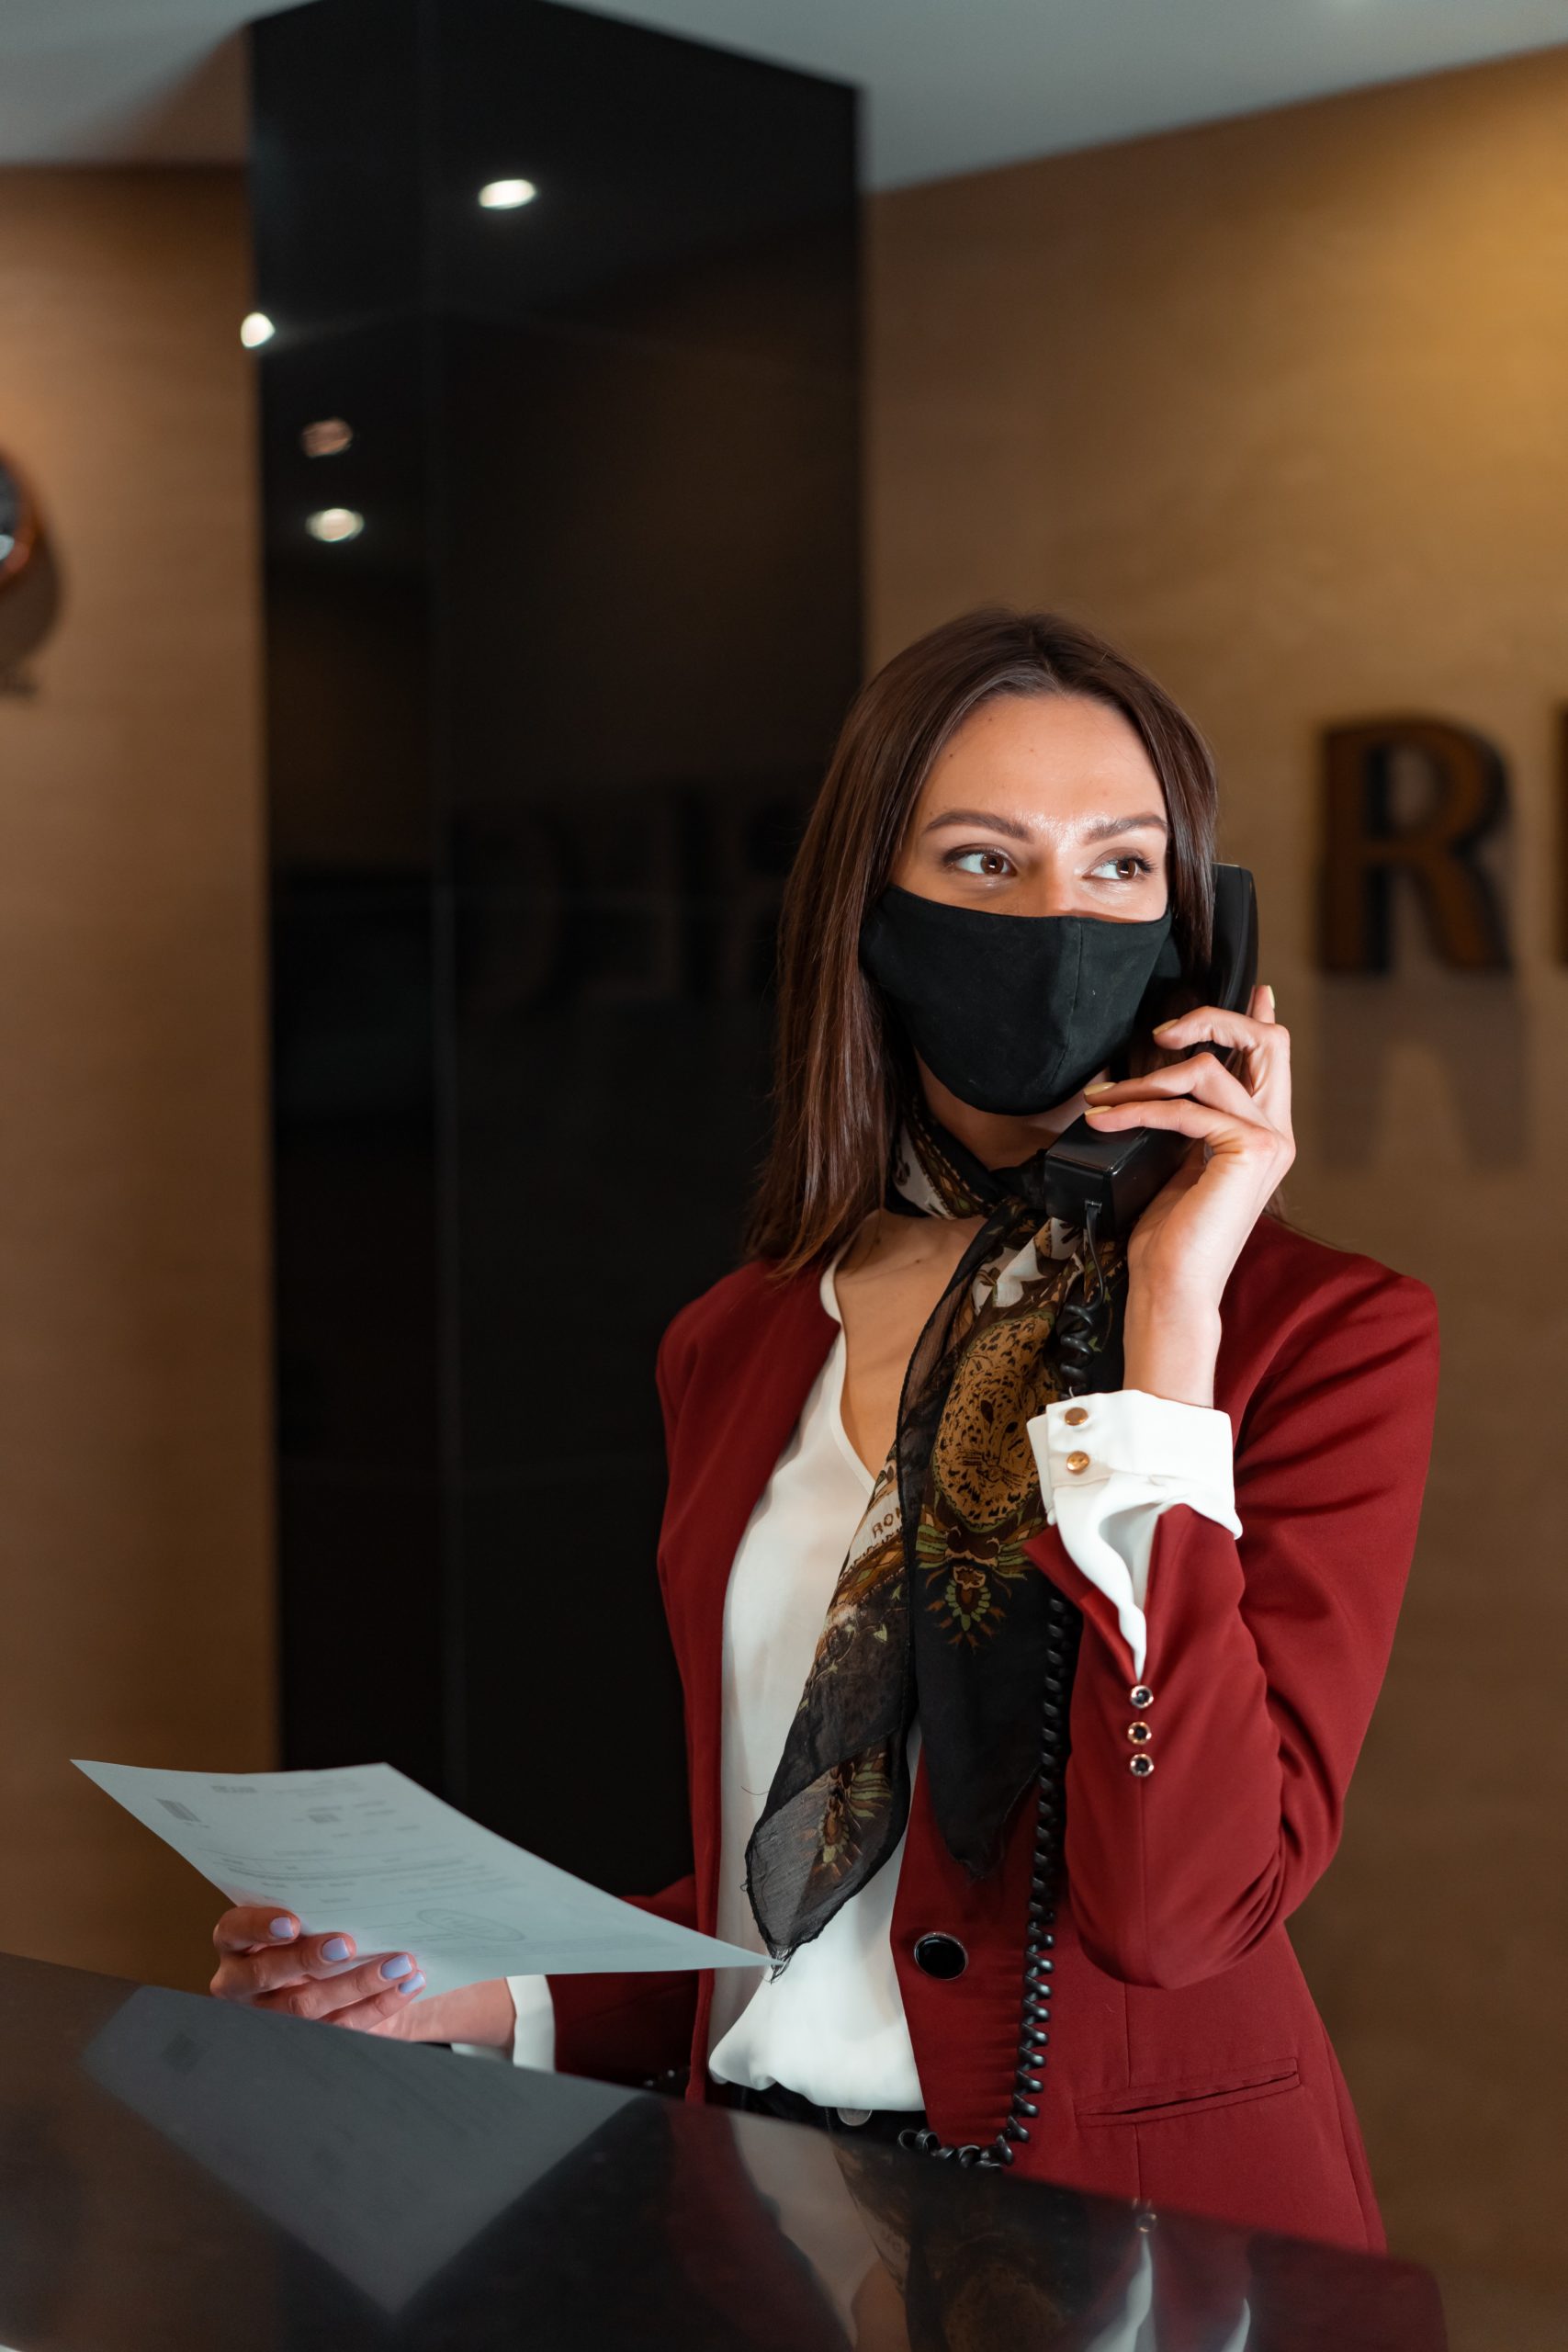 woman on the phone wearing a white shirt and red blazer wearing a mask, holding a piece of paper in front of a desk